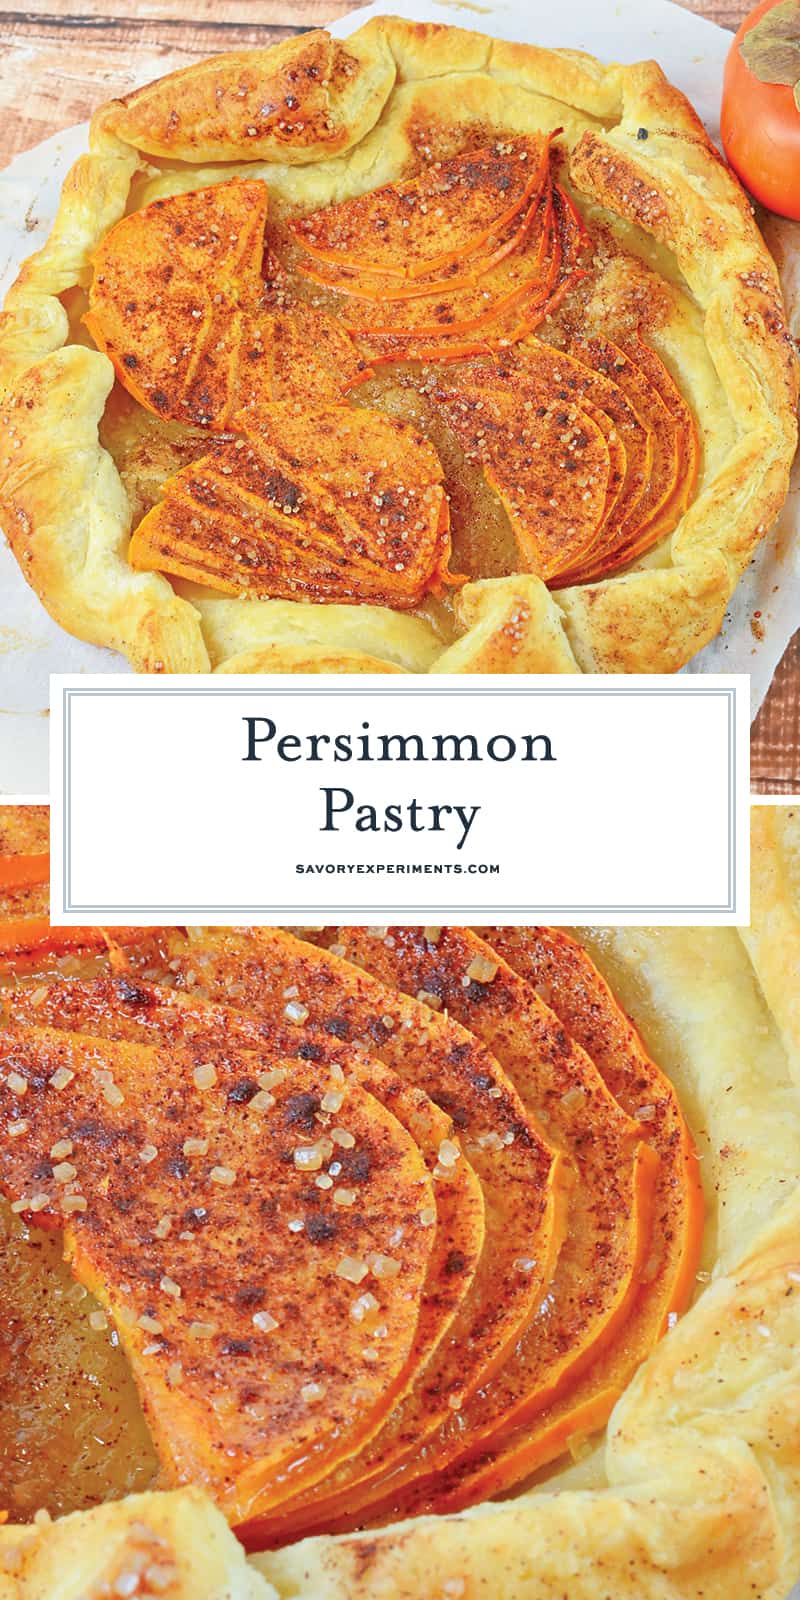 This Persimmon recipe is a delicious twist on the typical pastries you're used to! A Persimmon Pastry is an easy dessert or breakfast recipe! #tartrecipes #persimmonrecipes www.savoryexperiments.com